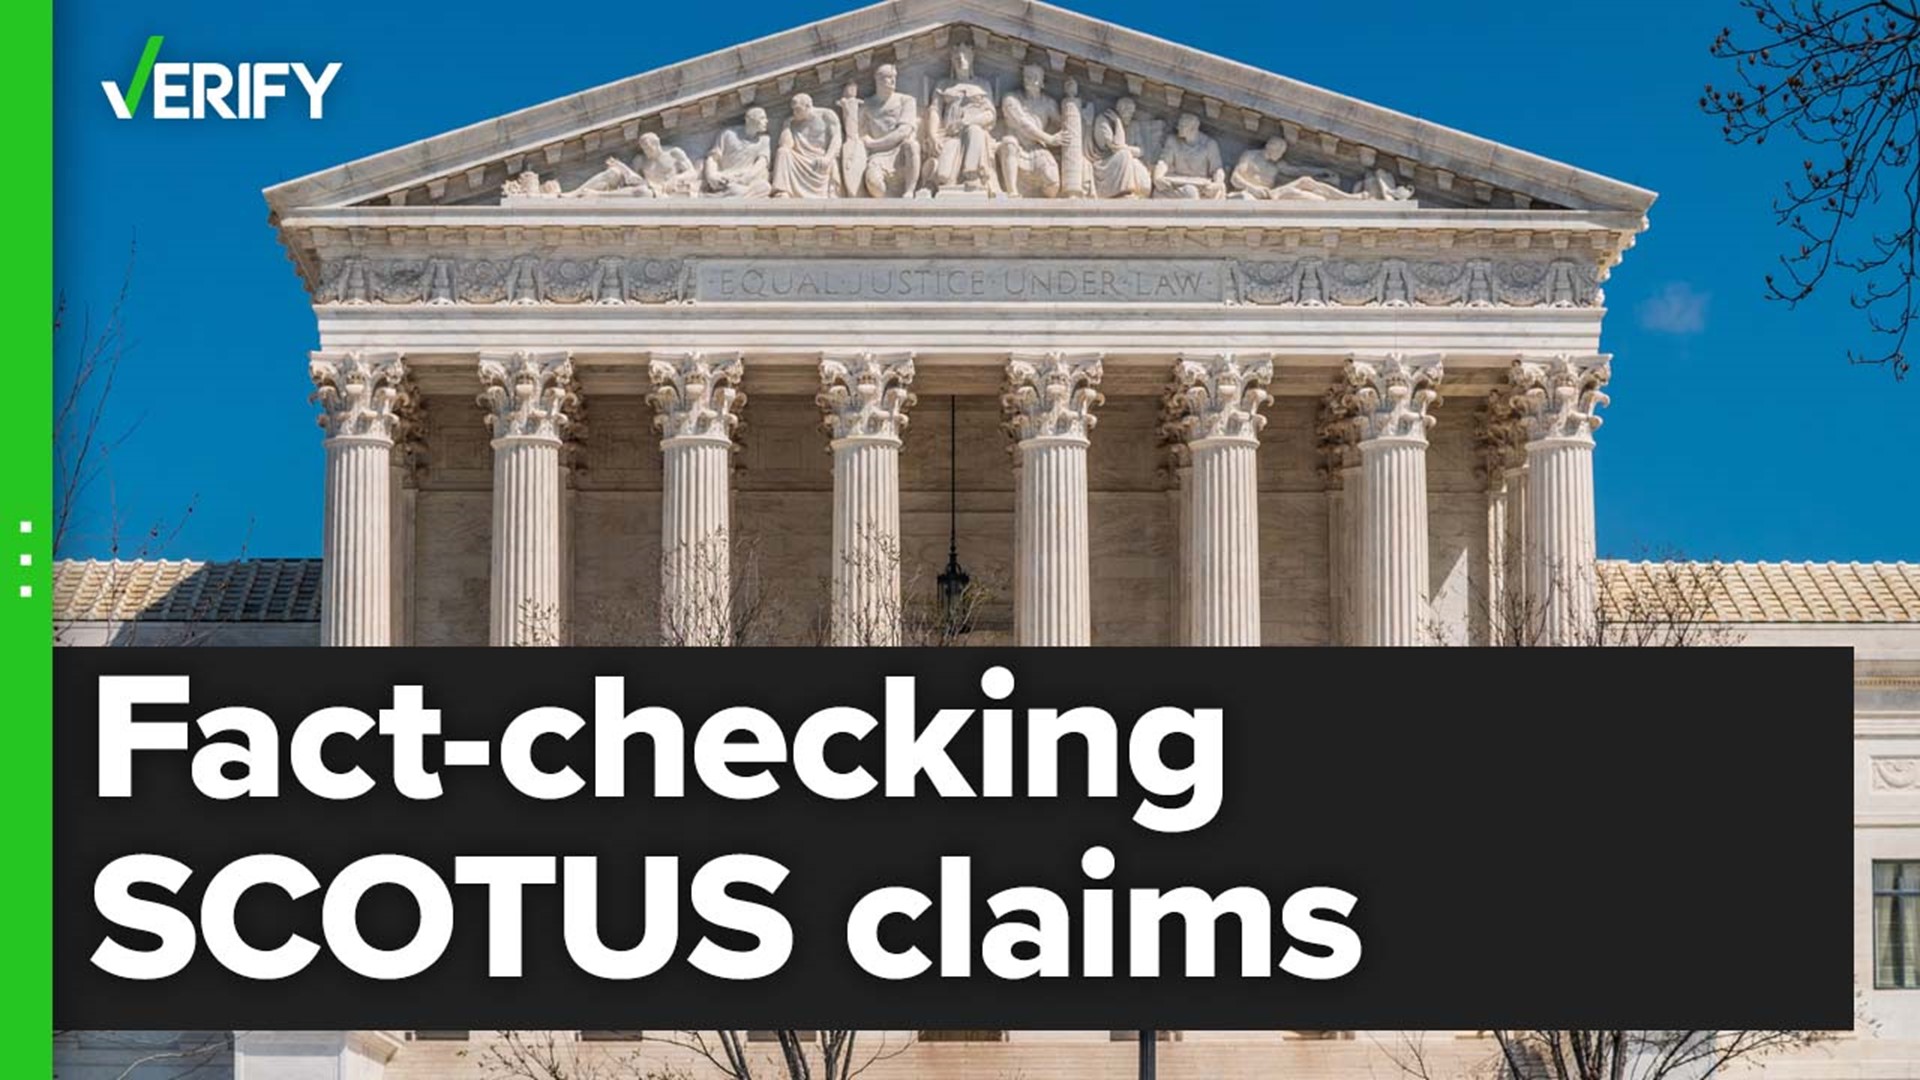 The VERIFY team investigated two claims about Supreme Court justices’ statements during oral argument, which have drawn criticism from some online.